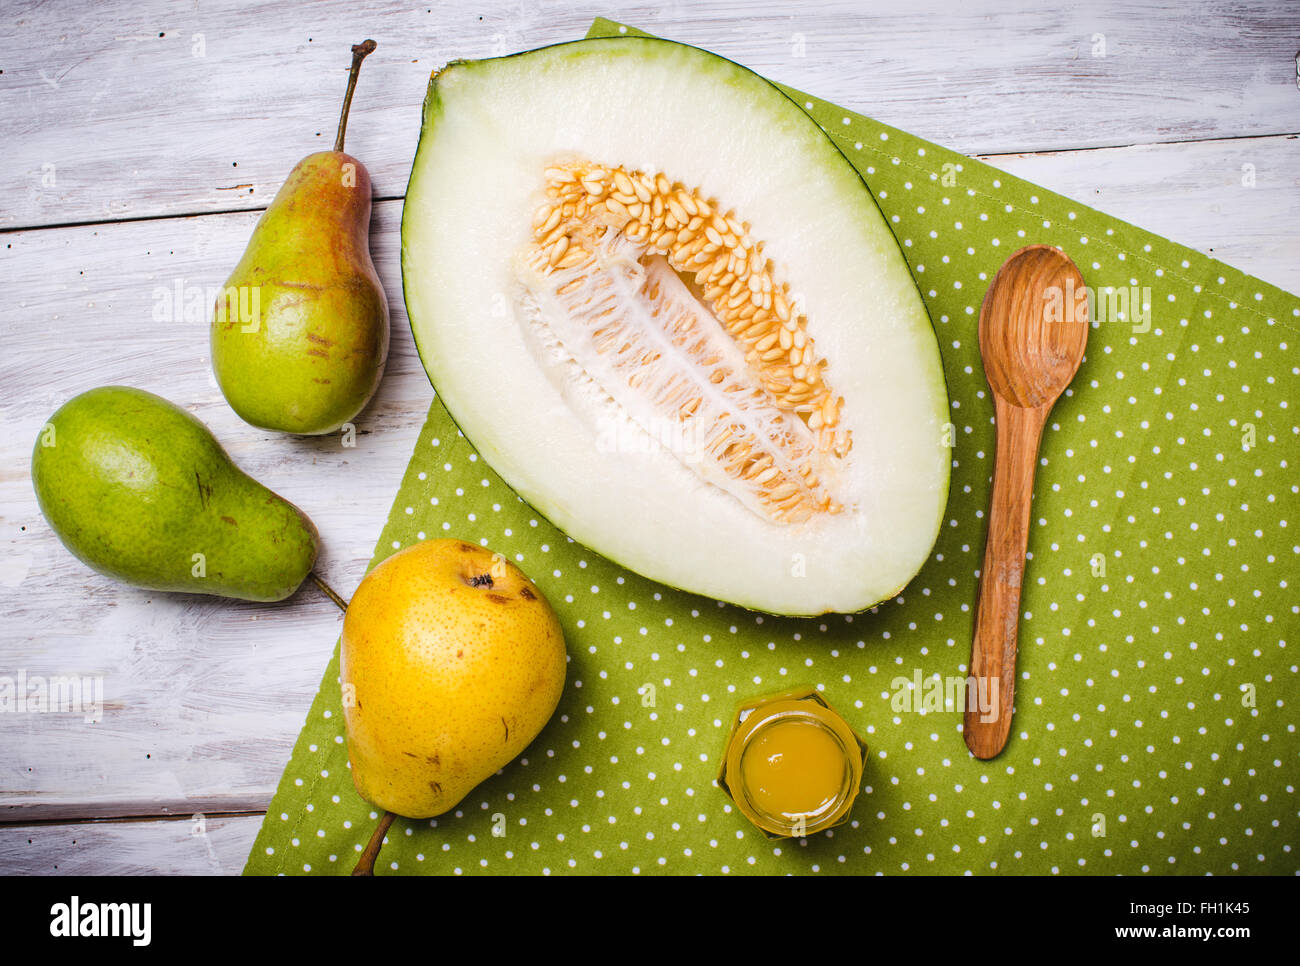 Melon with honey and green yellow pears on wood in rustic style Stock Photo